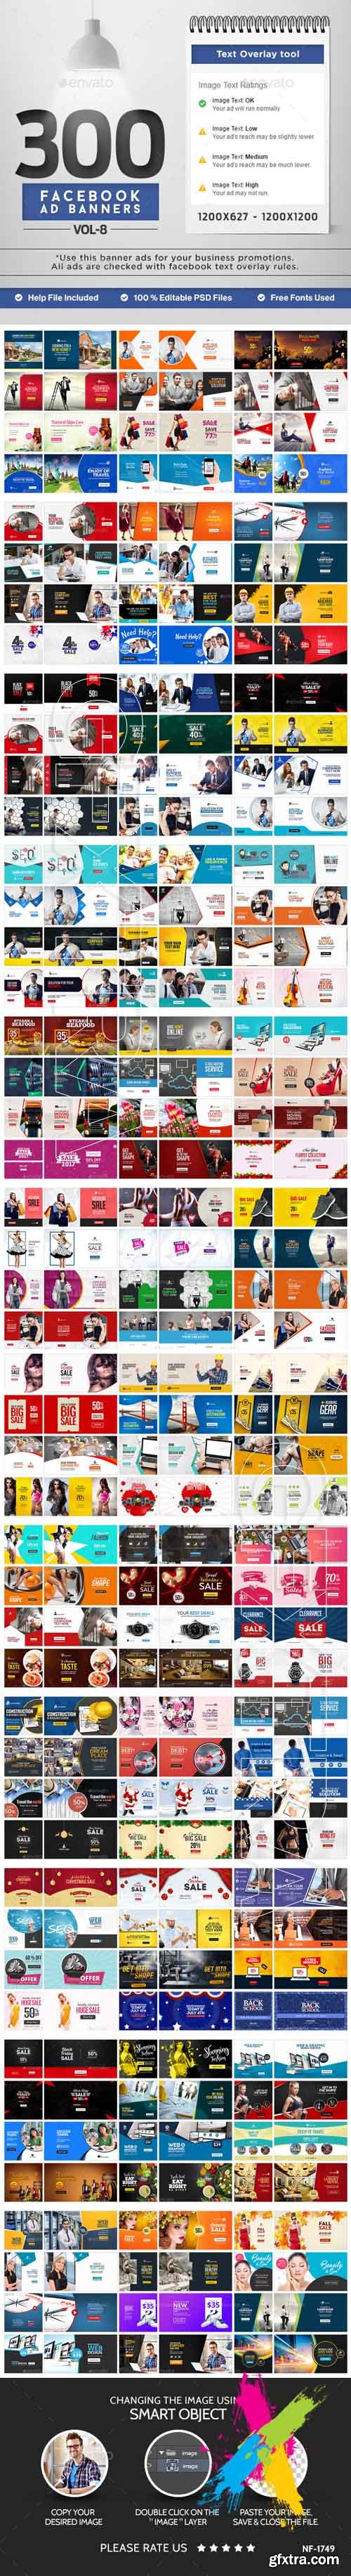 Graphicriver - Facebook Newsfeed AD Banners Vol 8 - 150 Designs 20325499